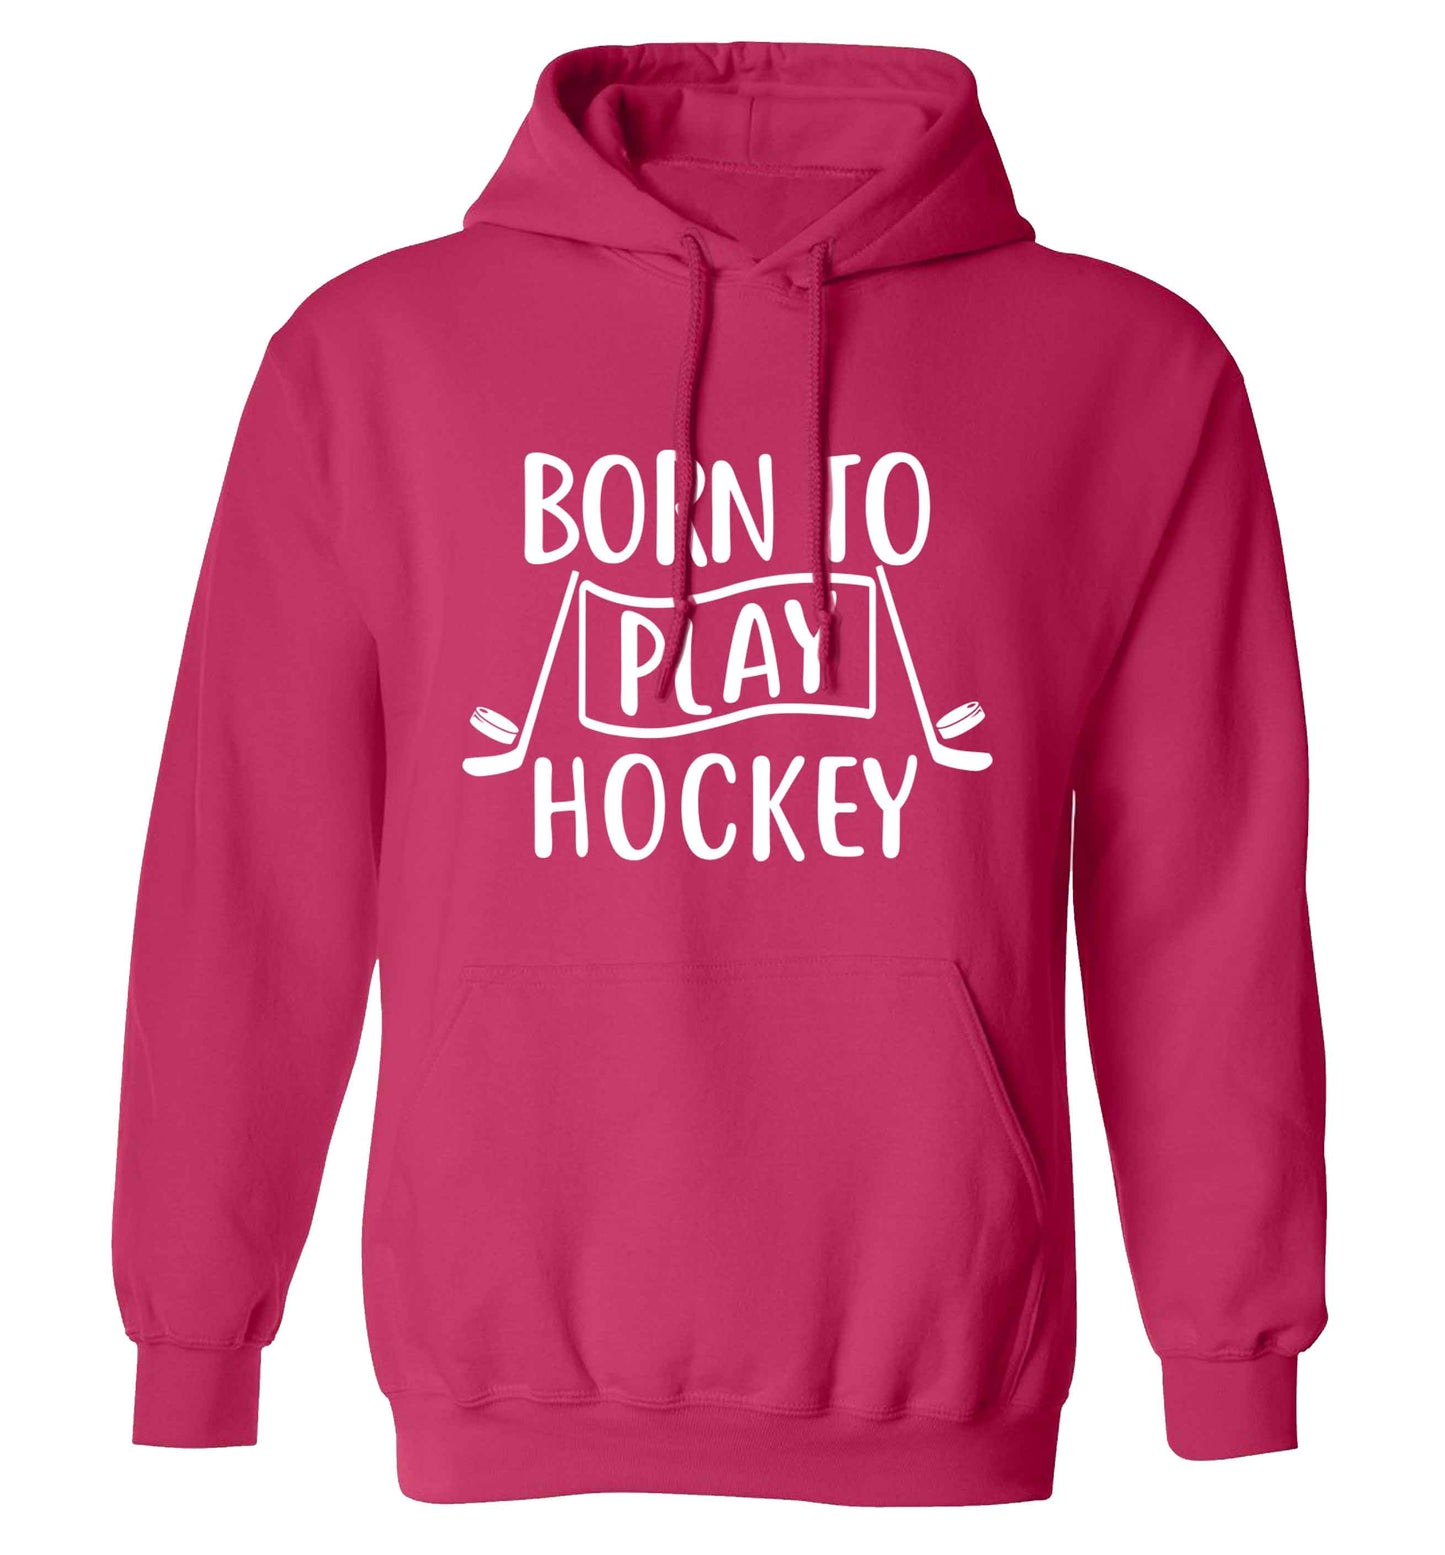 Born to play hockey adults unisex pink hoodie 2XL